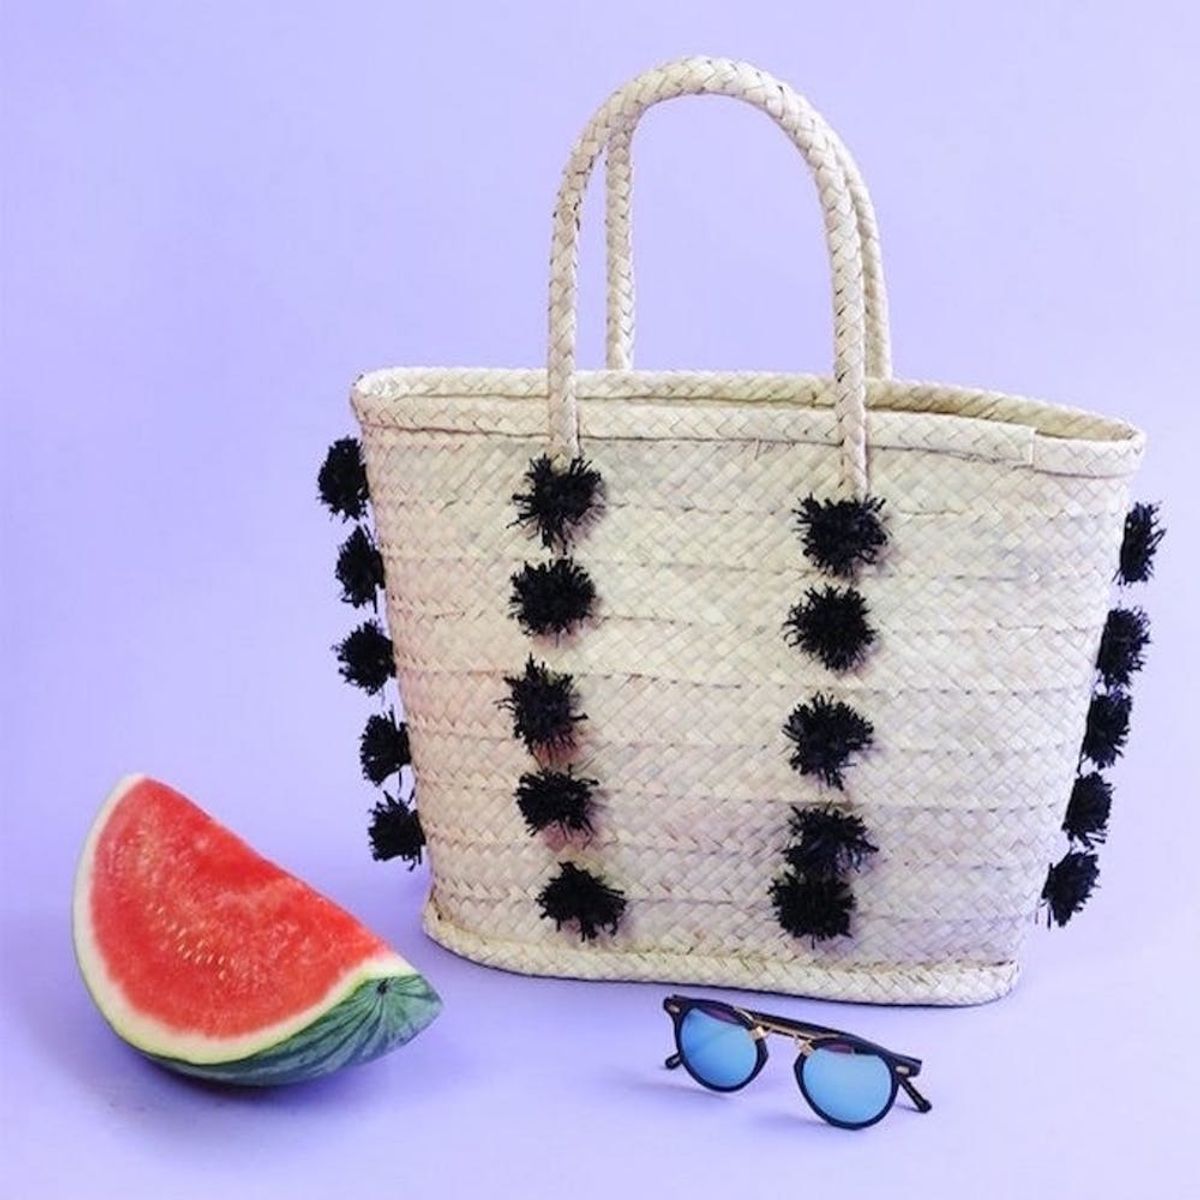 27 Playful Straw Bags for Every End-of-Summer #OOTD